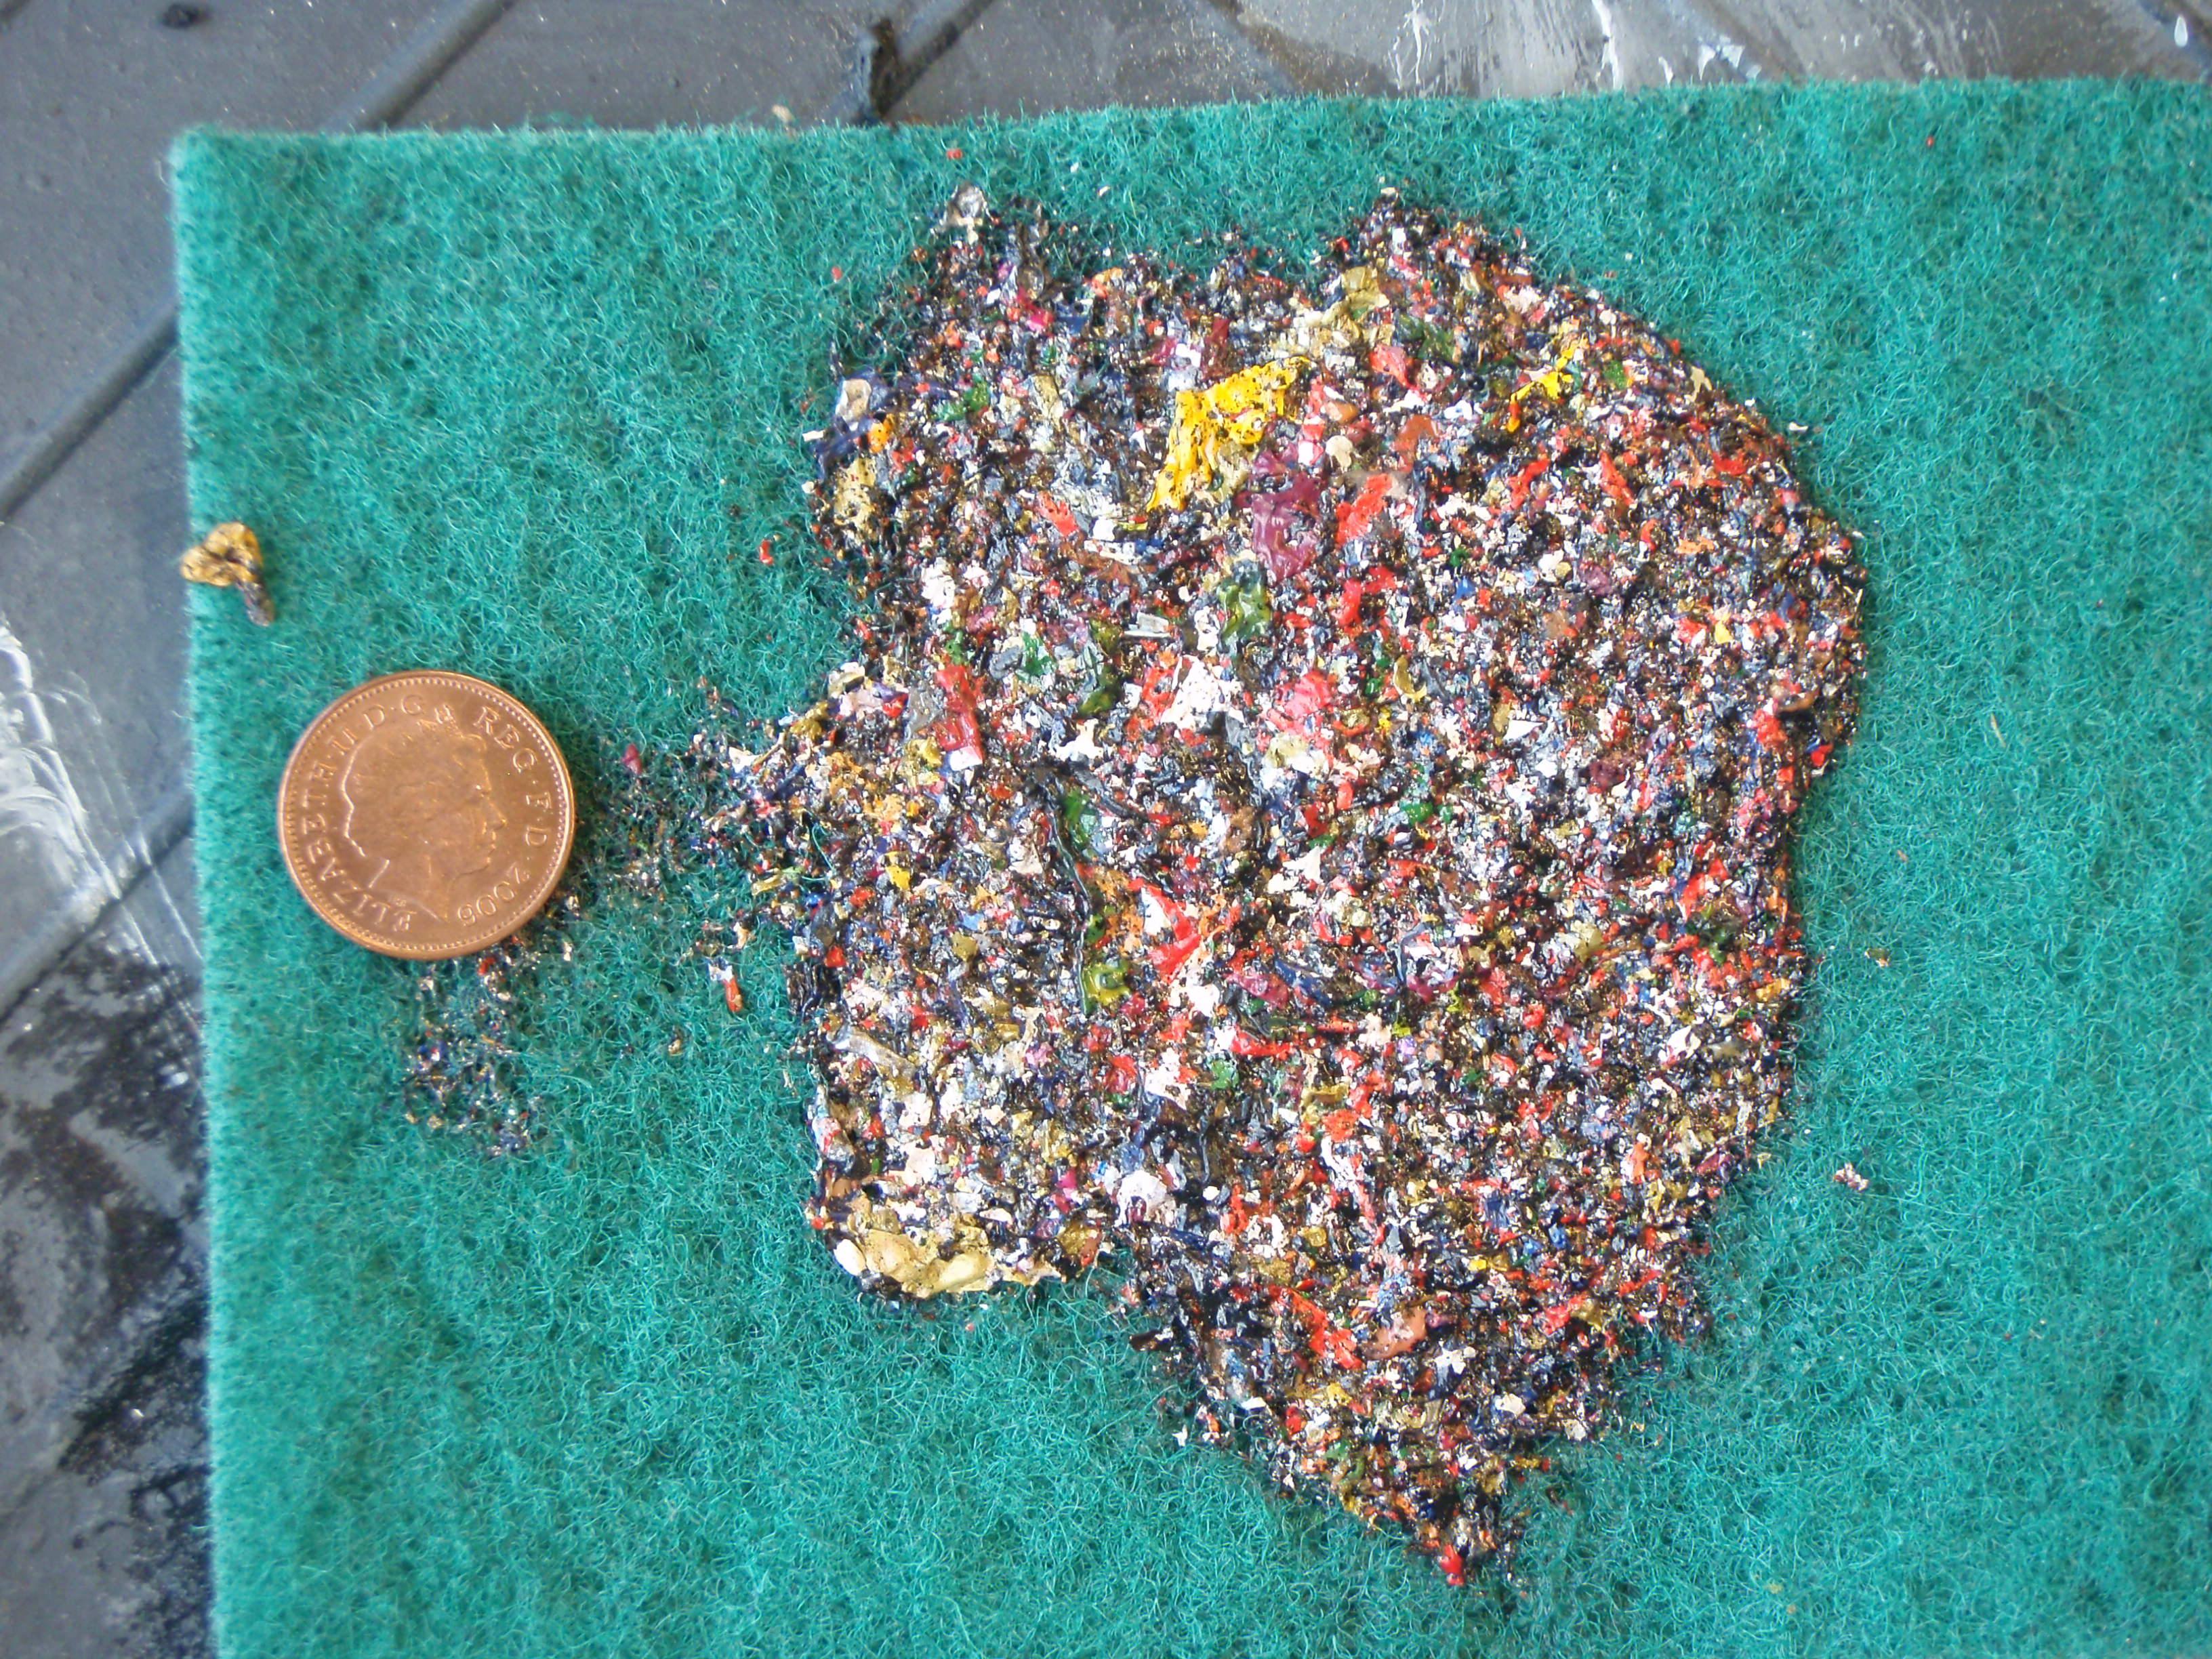 The sludge at the bottom of the strip. Penny for scale!